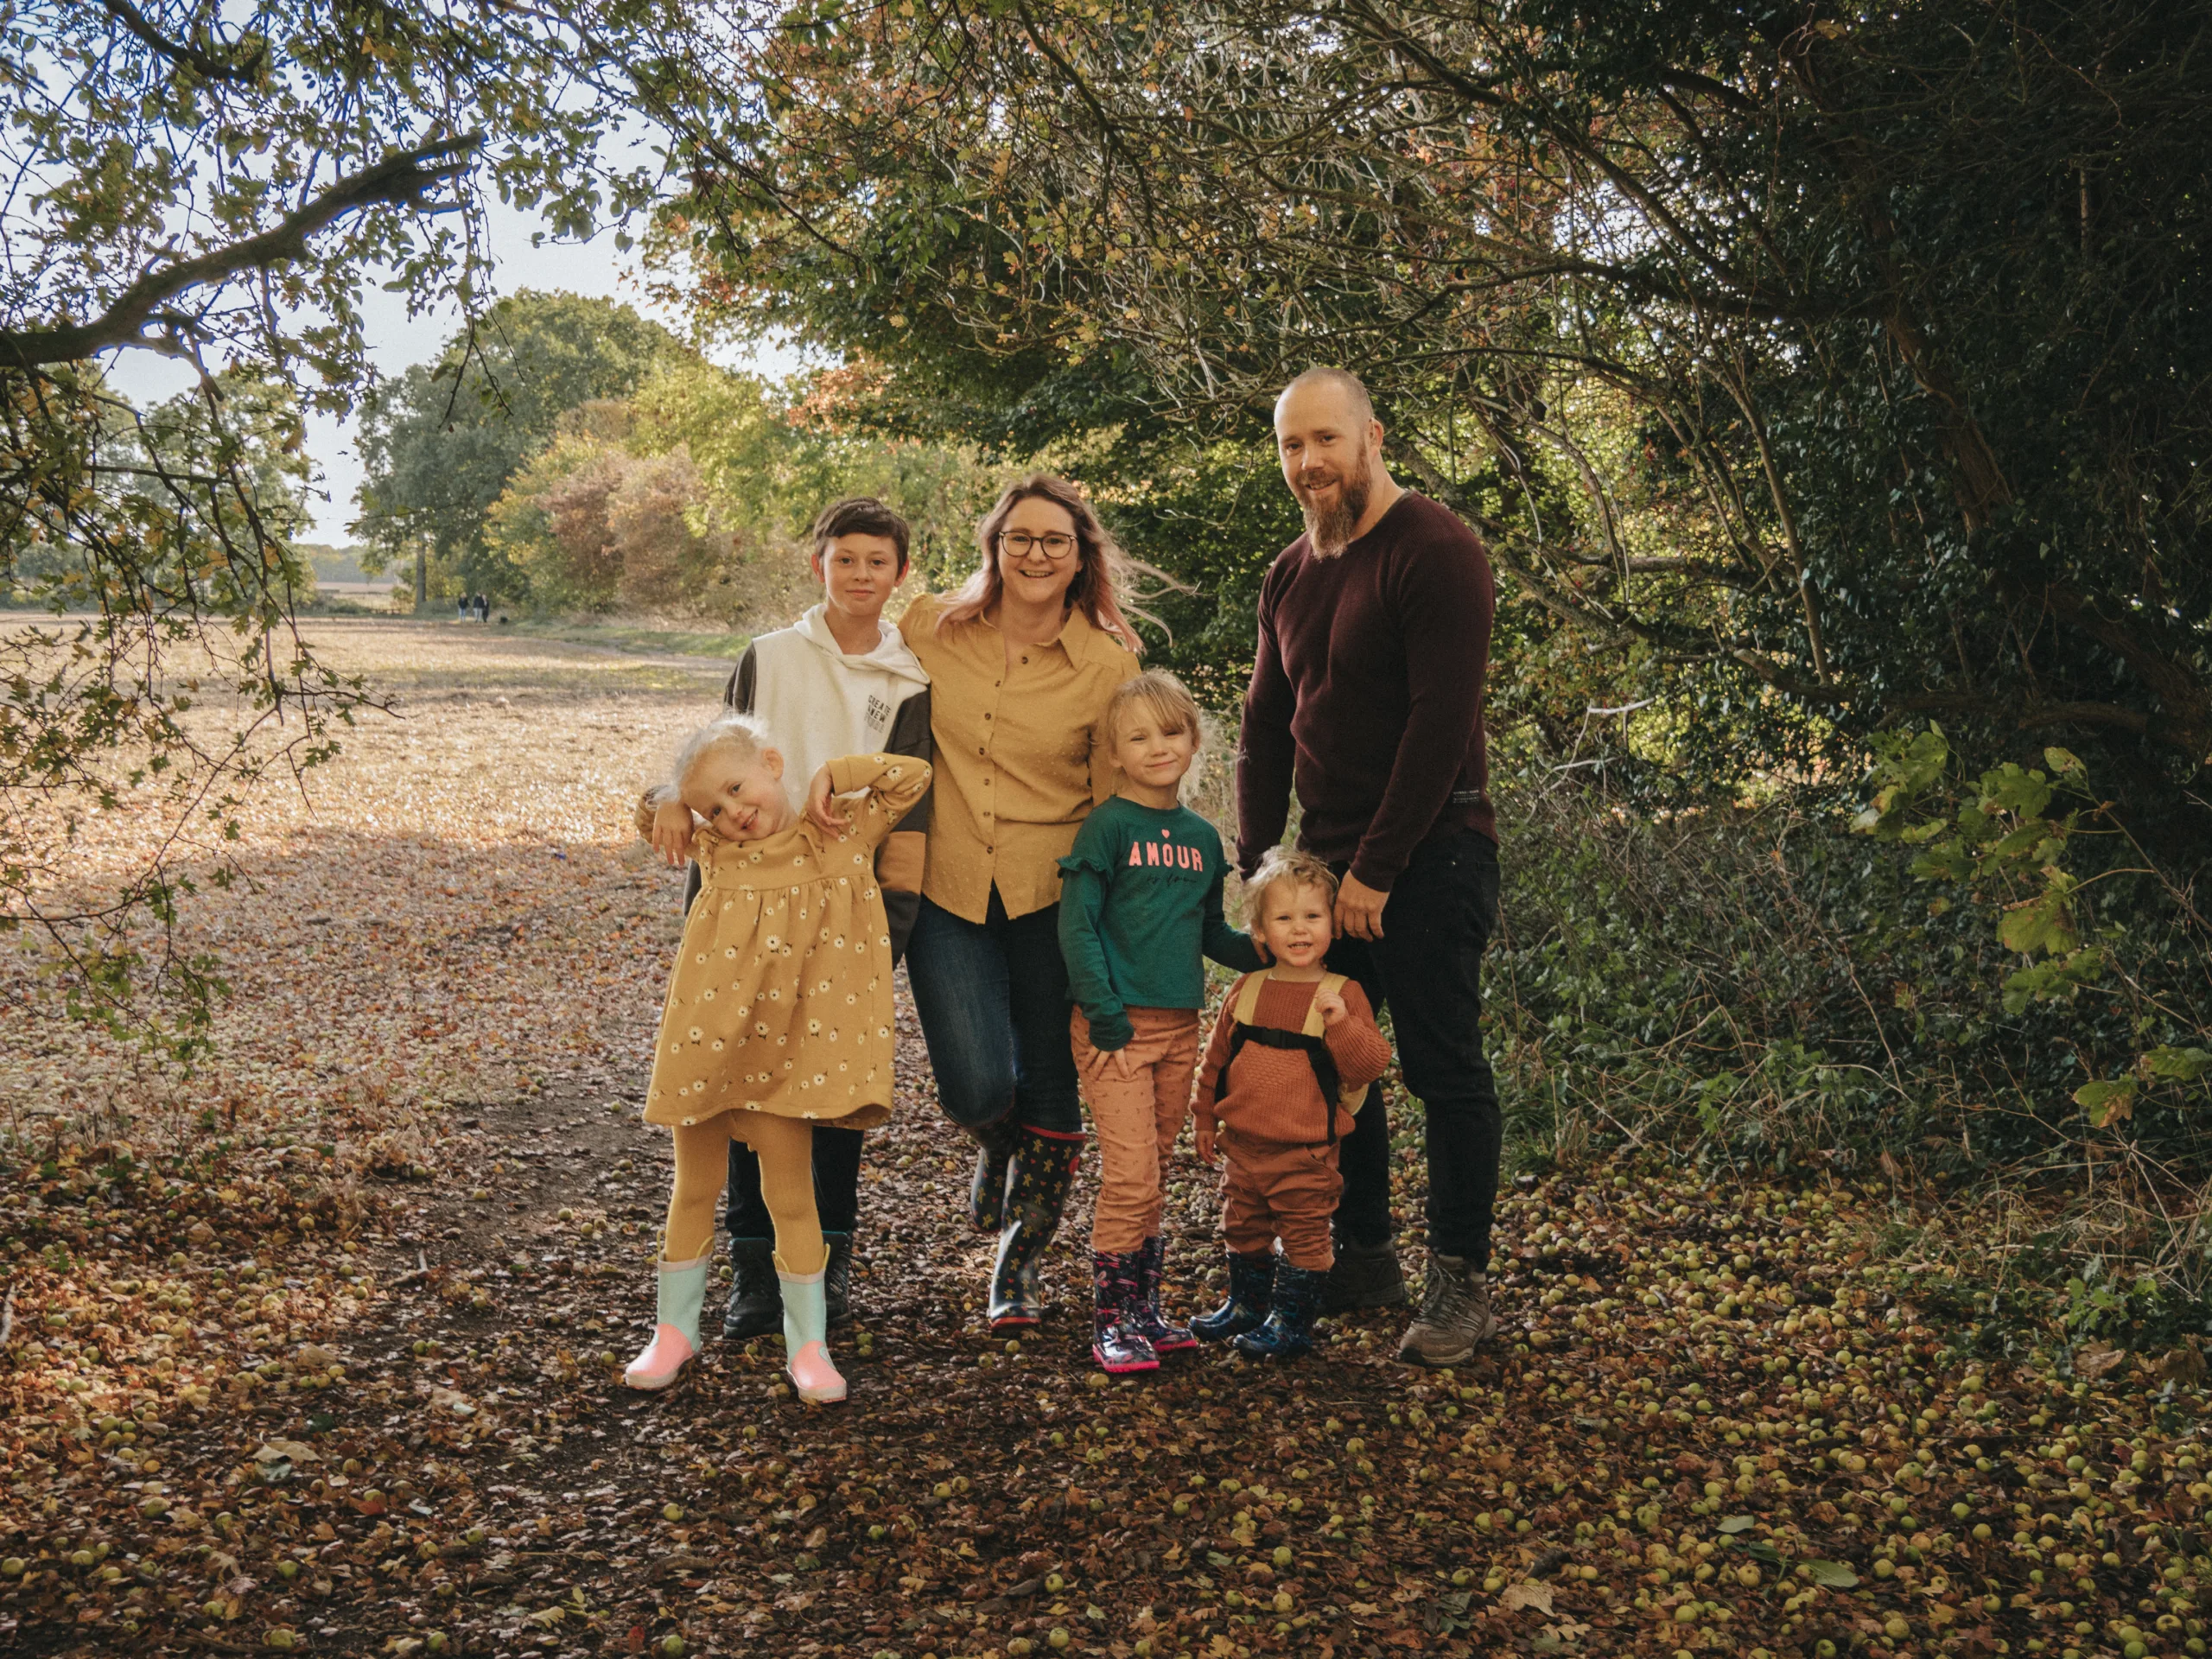 A family posing for a photo in a wooded area with a photographer.